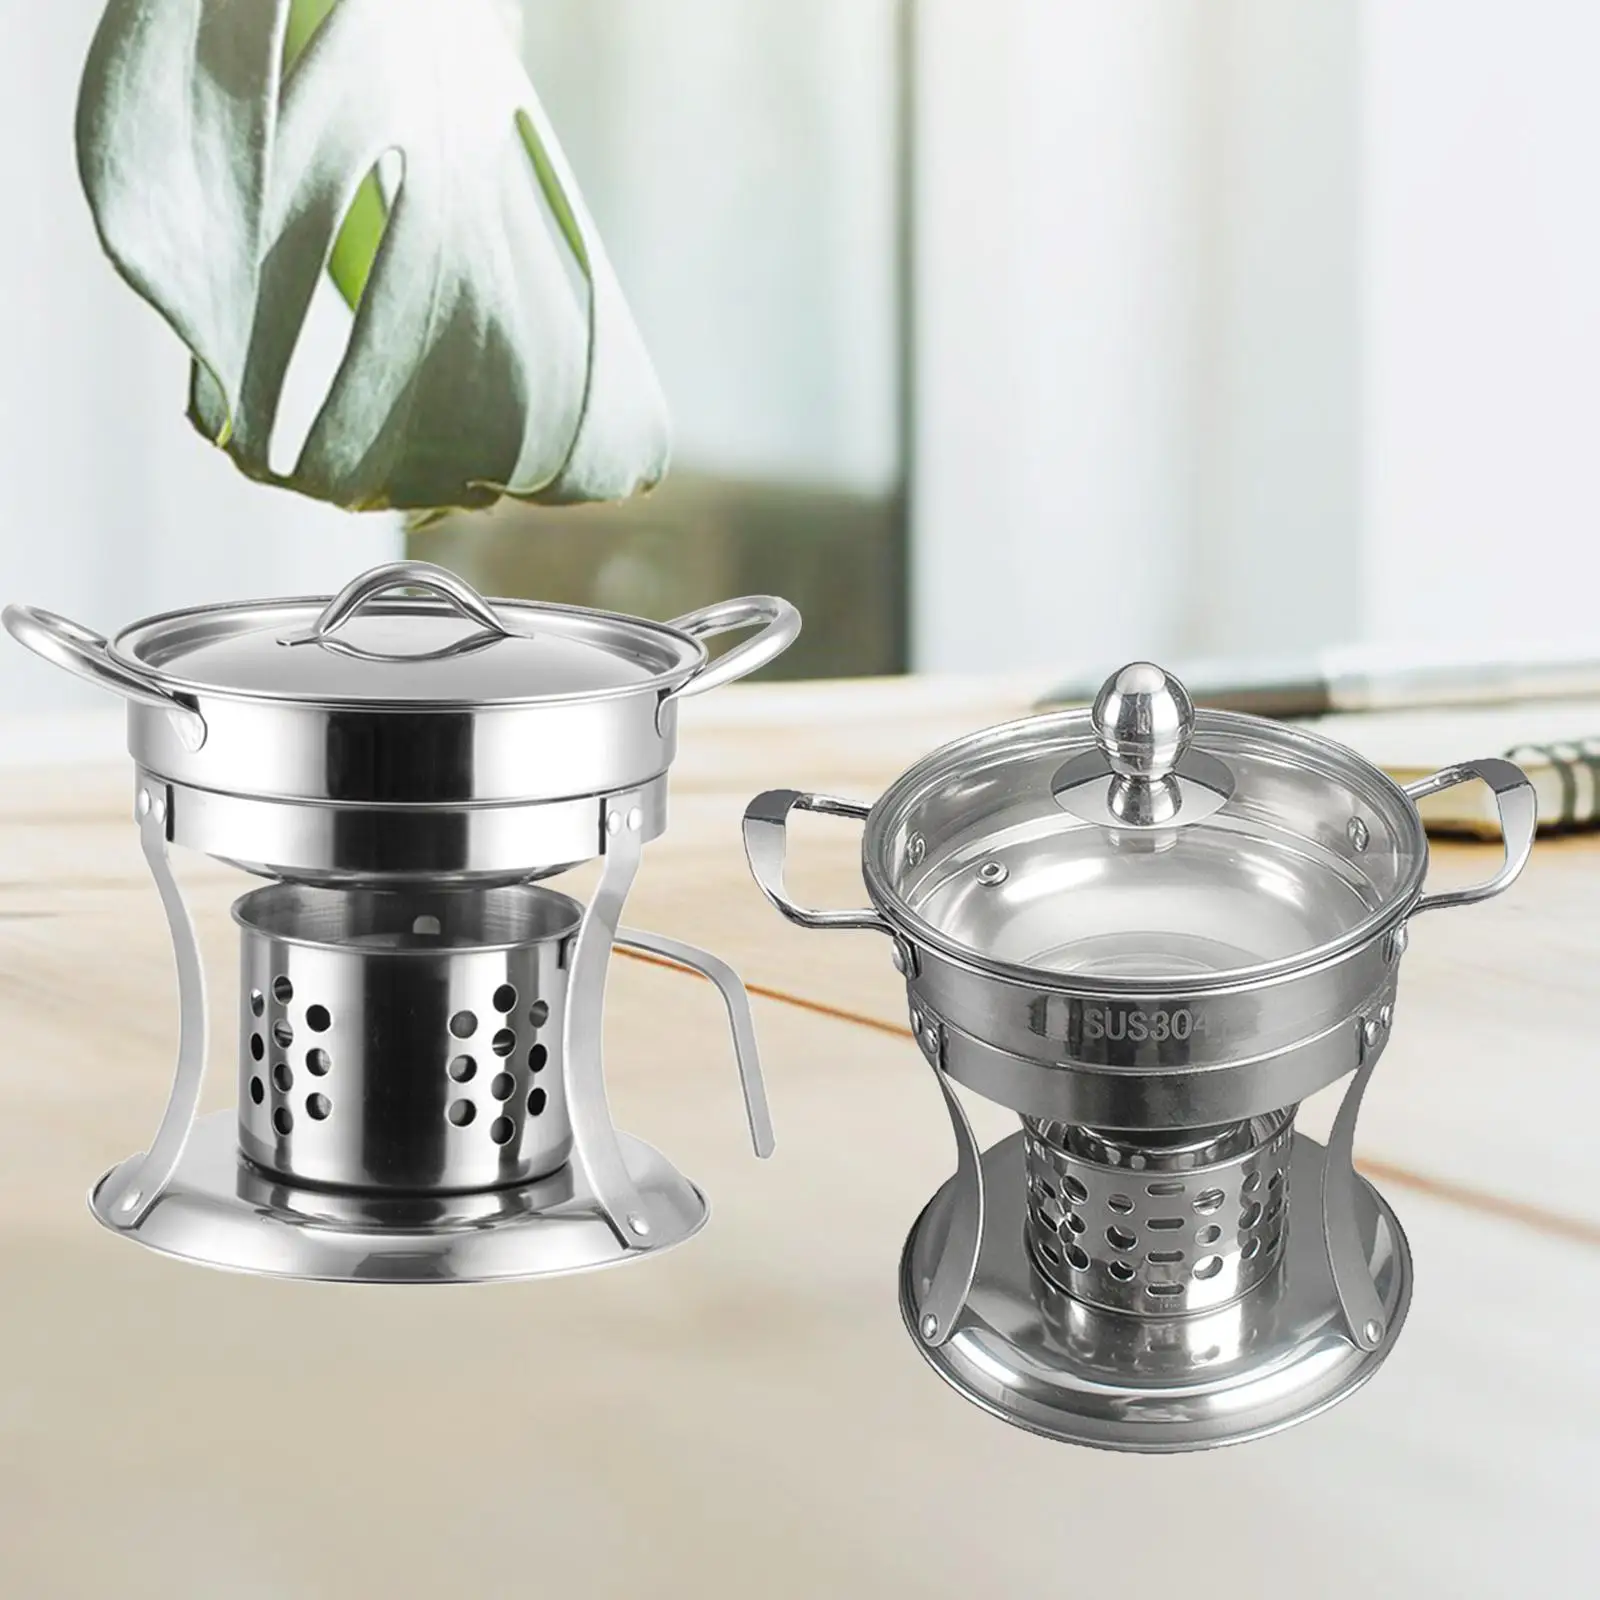 Stainless Steel Chafing Dish Hot Cheese Fondue Set Melting Pot Single Non-magnetic Alcohol Burner for Camping